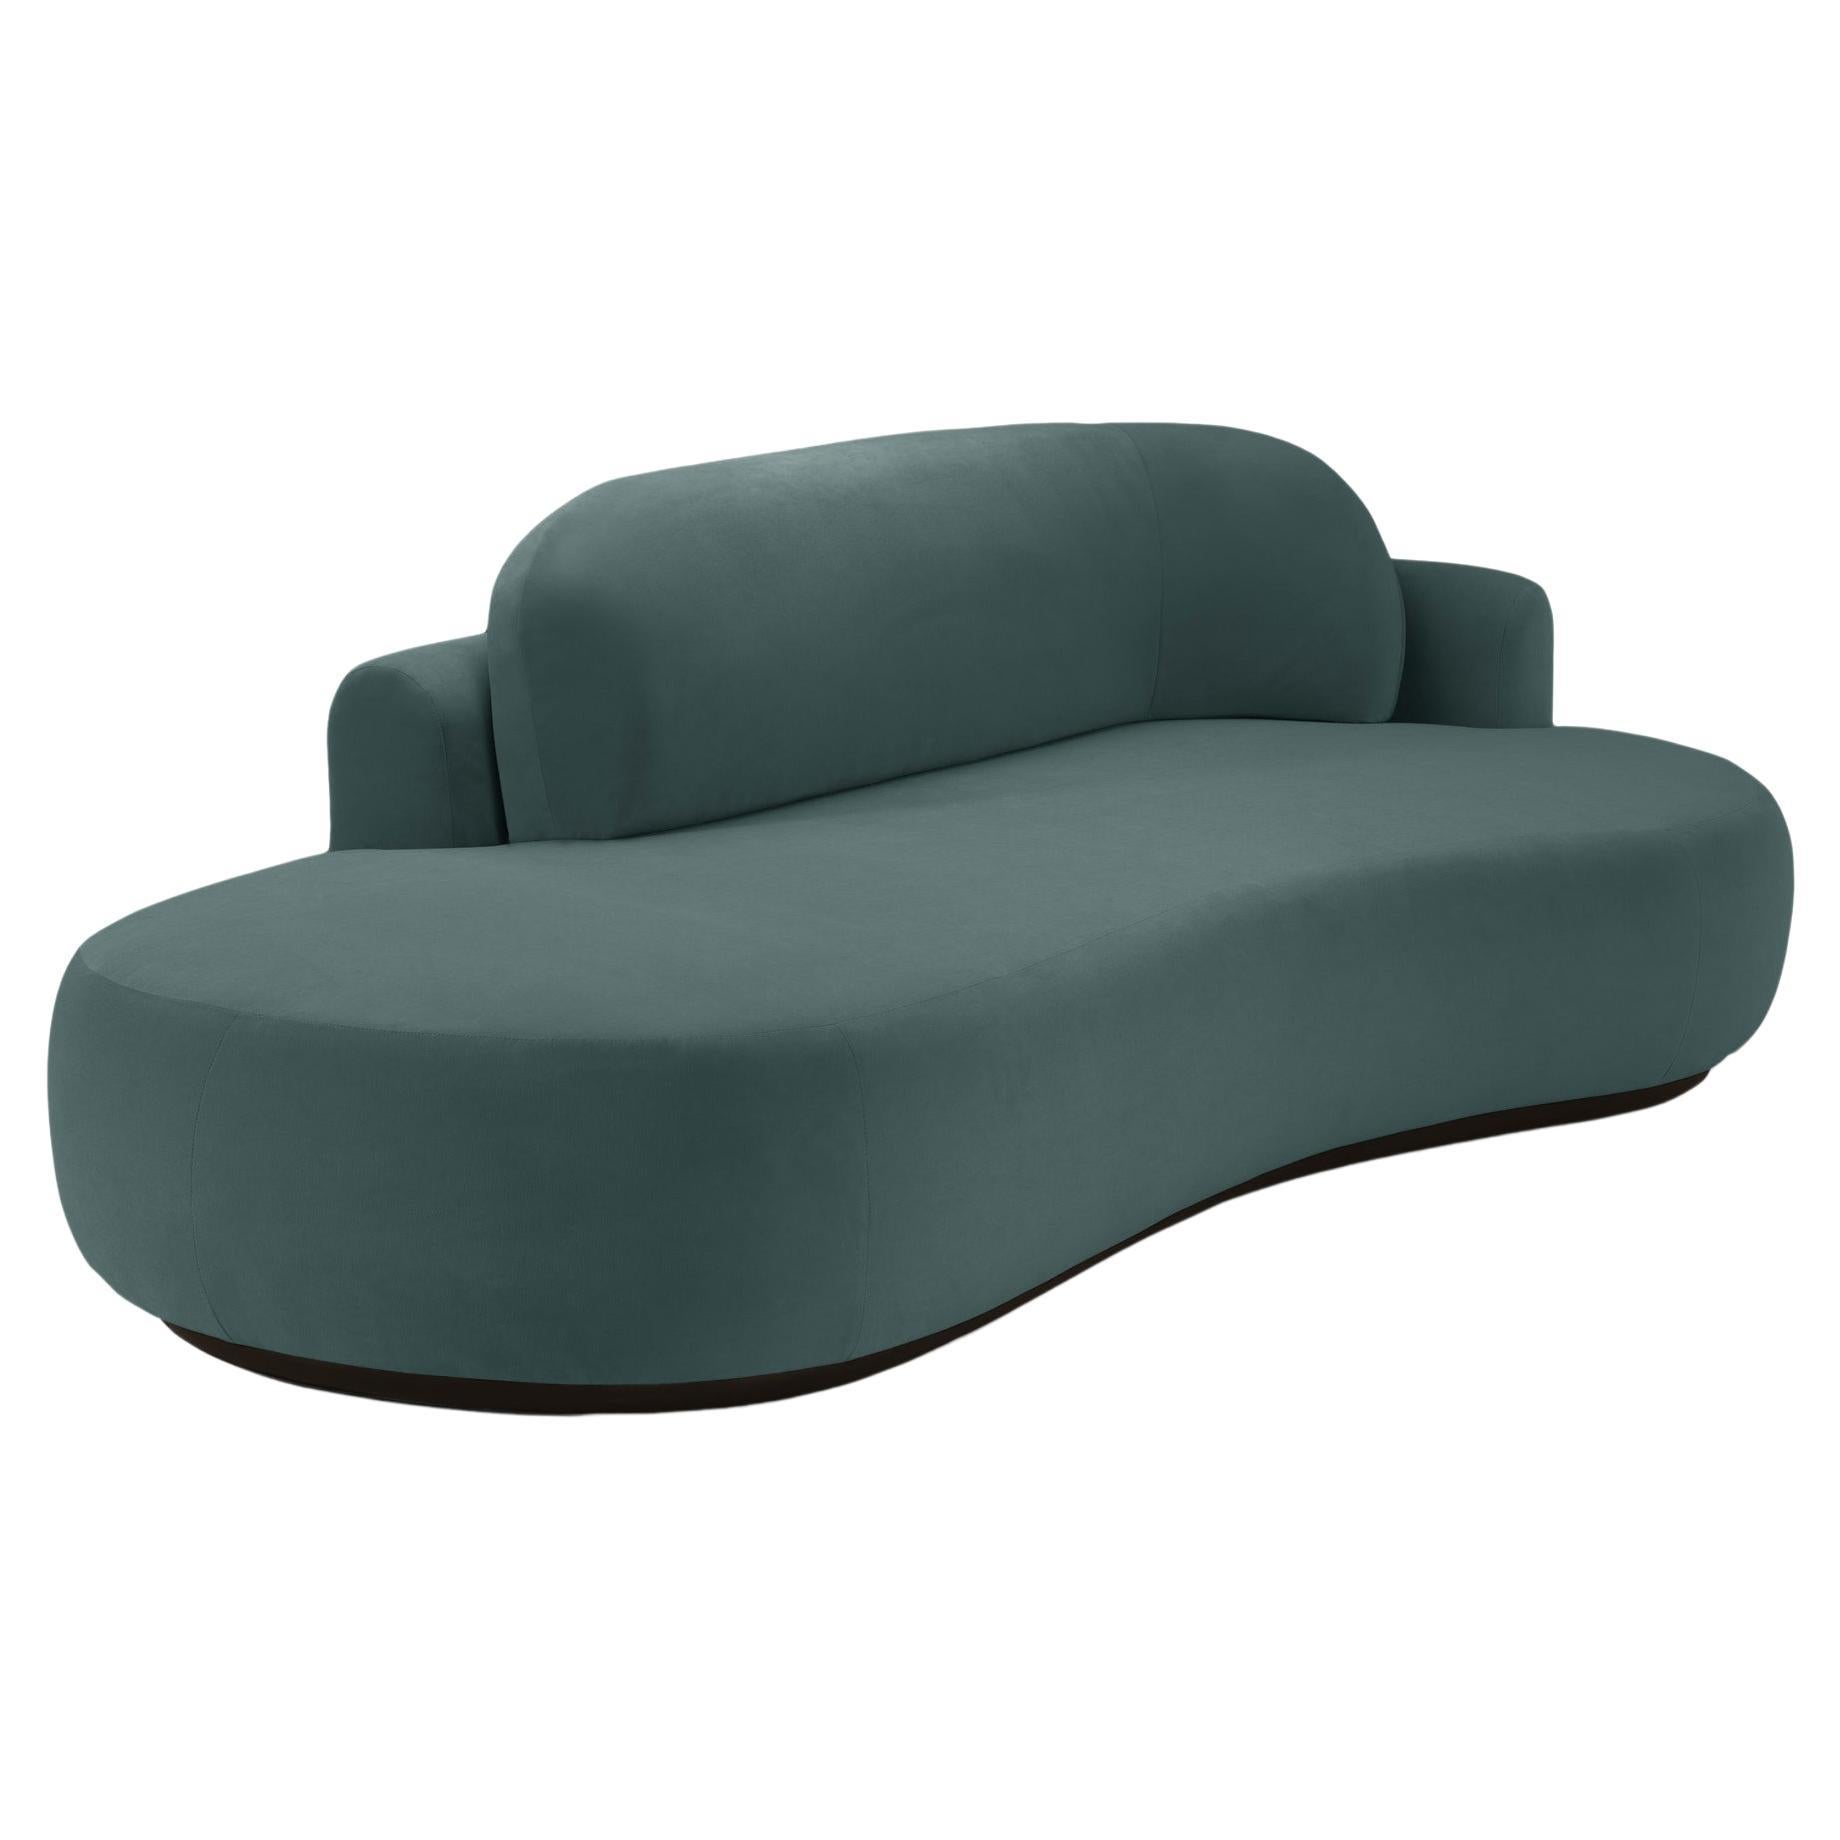 Naked Curved Sofa Single with Beech Ash-056-5 and Teal